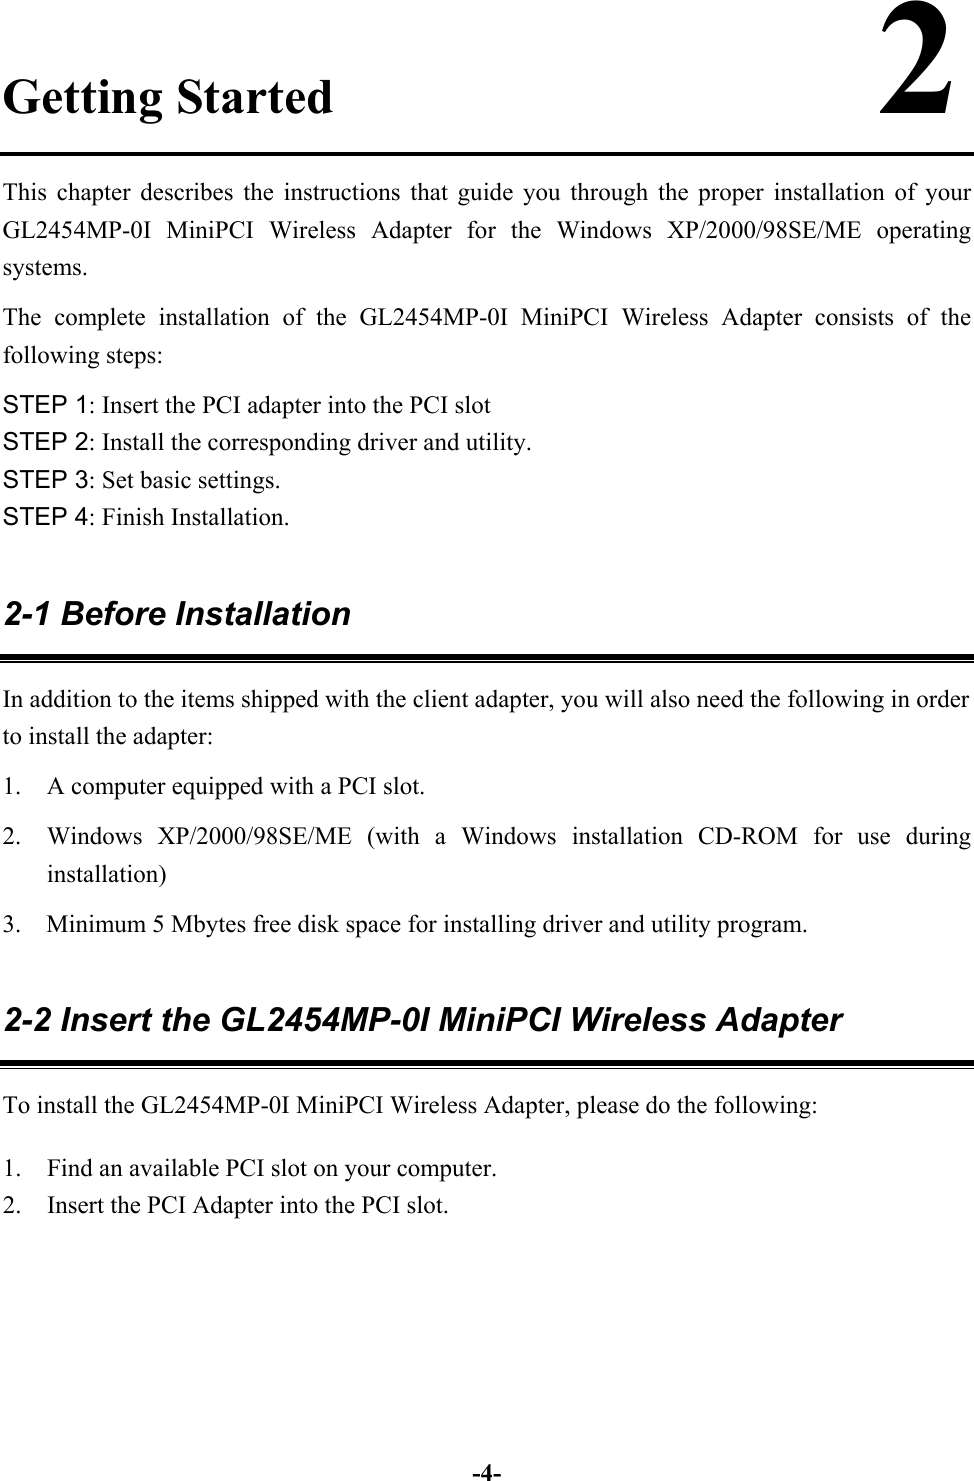 -4-Getting Started                      2This chapter describes the instructions that guide you through the proper installation of yourGL2454MP-0I MiniPCI Wireless Adapter for the Windows XP/2000/98SE/ME operatingsystems.The complete installation of the GL2454MP-0I MiniPCI Wireless Adapter consists of thefollowing steps:STEP 1: Insert the PCI adapter into the PCI slotSTEP 2: Install the corresponding driver and utility.STEP 3: Set basic settings.STEP 4: Finish Installation.2-1 Before InstallationIn addition to the items shipped with the client adapter, you will also need the following in orderto install the adapter:1. A computer equipped with a PCI slot.2. Windows XP/2000/98SE/ME (with a Windows installation CD-ROM for use duringinstallation)3.    Minimum 5 Mbytes free disk space for installing driver and utility program.2-2 Insert the GL2454MP-0I MiniPCI Wireless AdapterTo install the GL2454MP-0I MiniPCI Wireless Adapter, please do the following:1. Find an available PCI slot on your computer.2. Insert the PCI Adapter into the PCI slot.